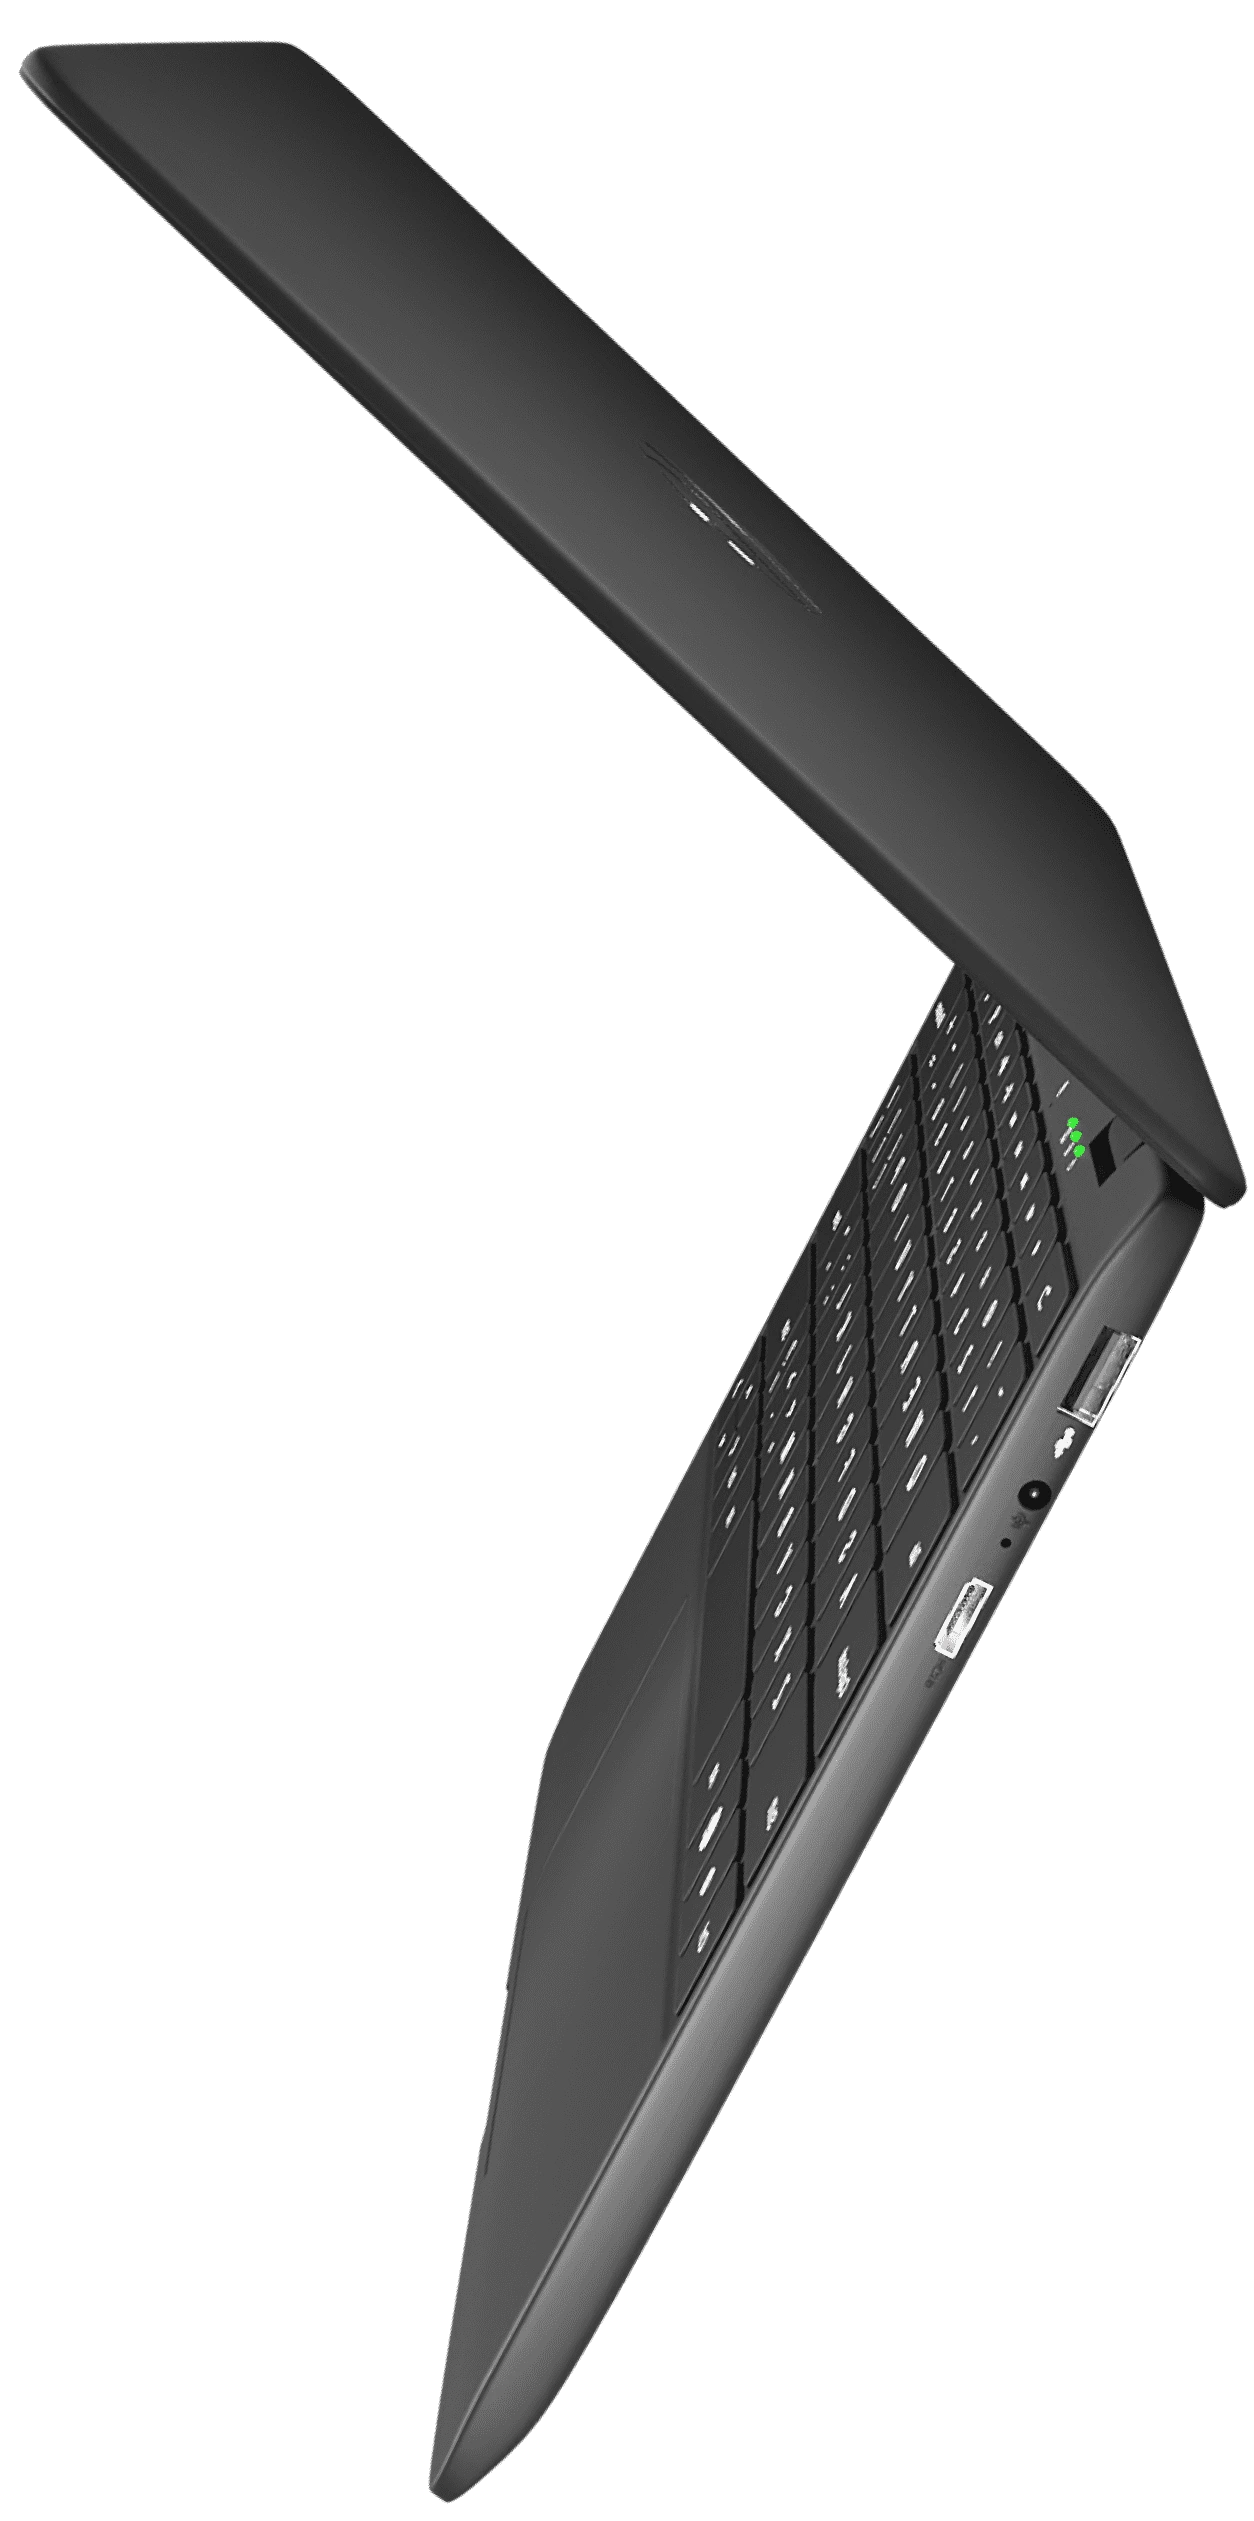 Side view of the primebook laptop in open tilt position showing one usb port, power socket port,and HDMI port